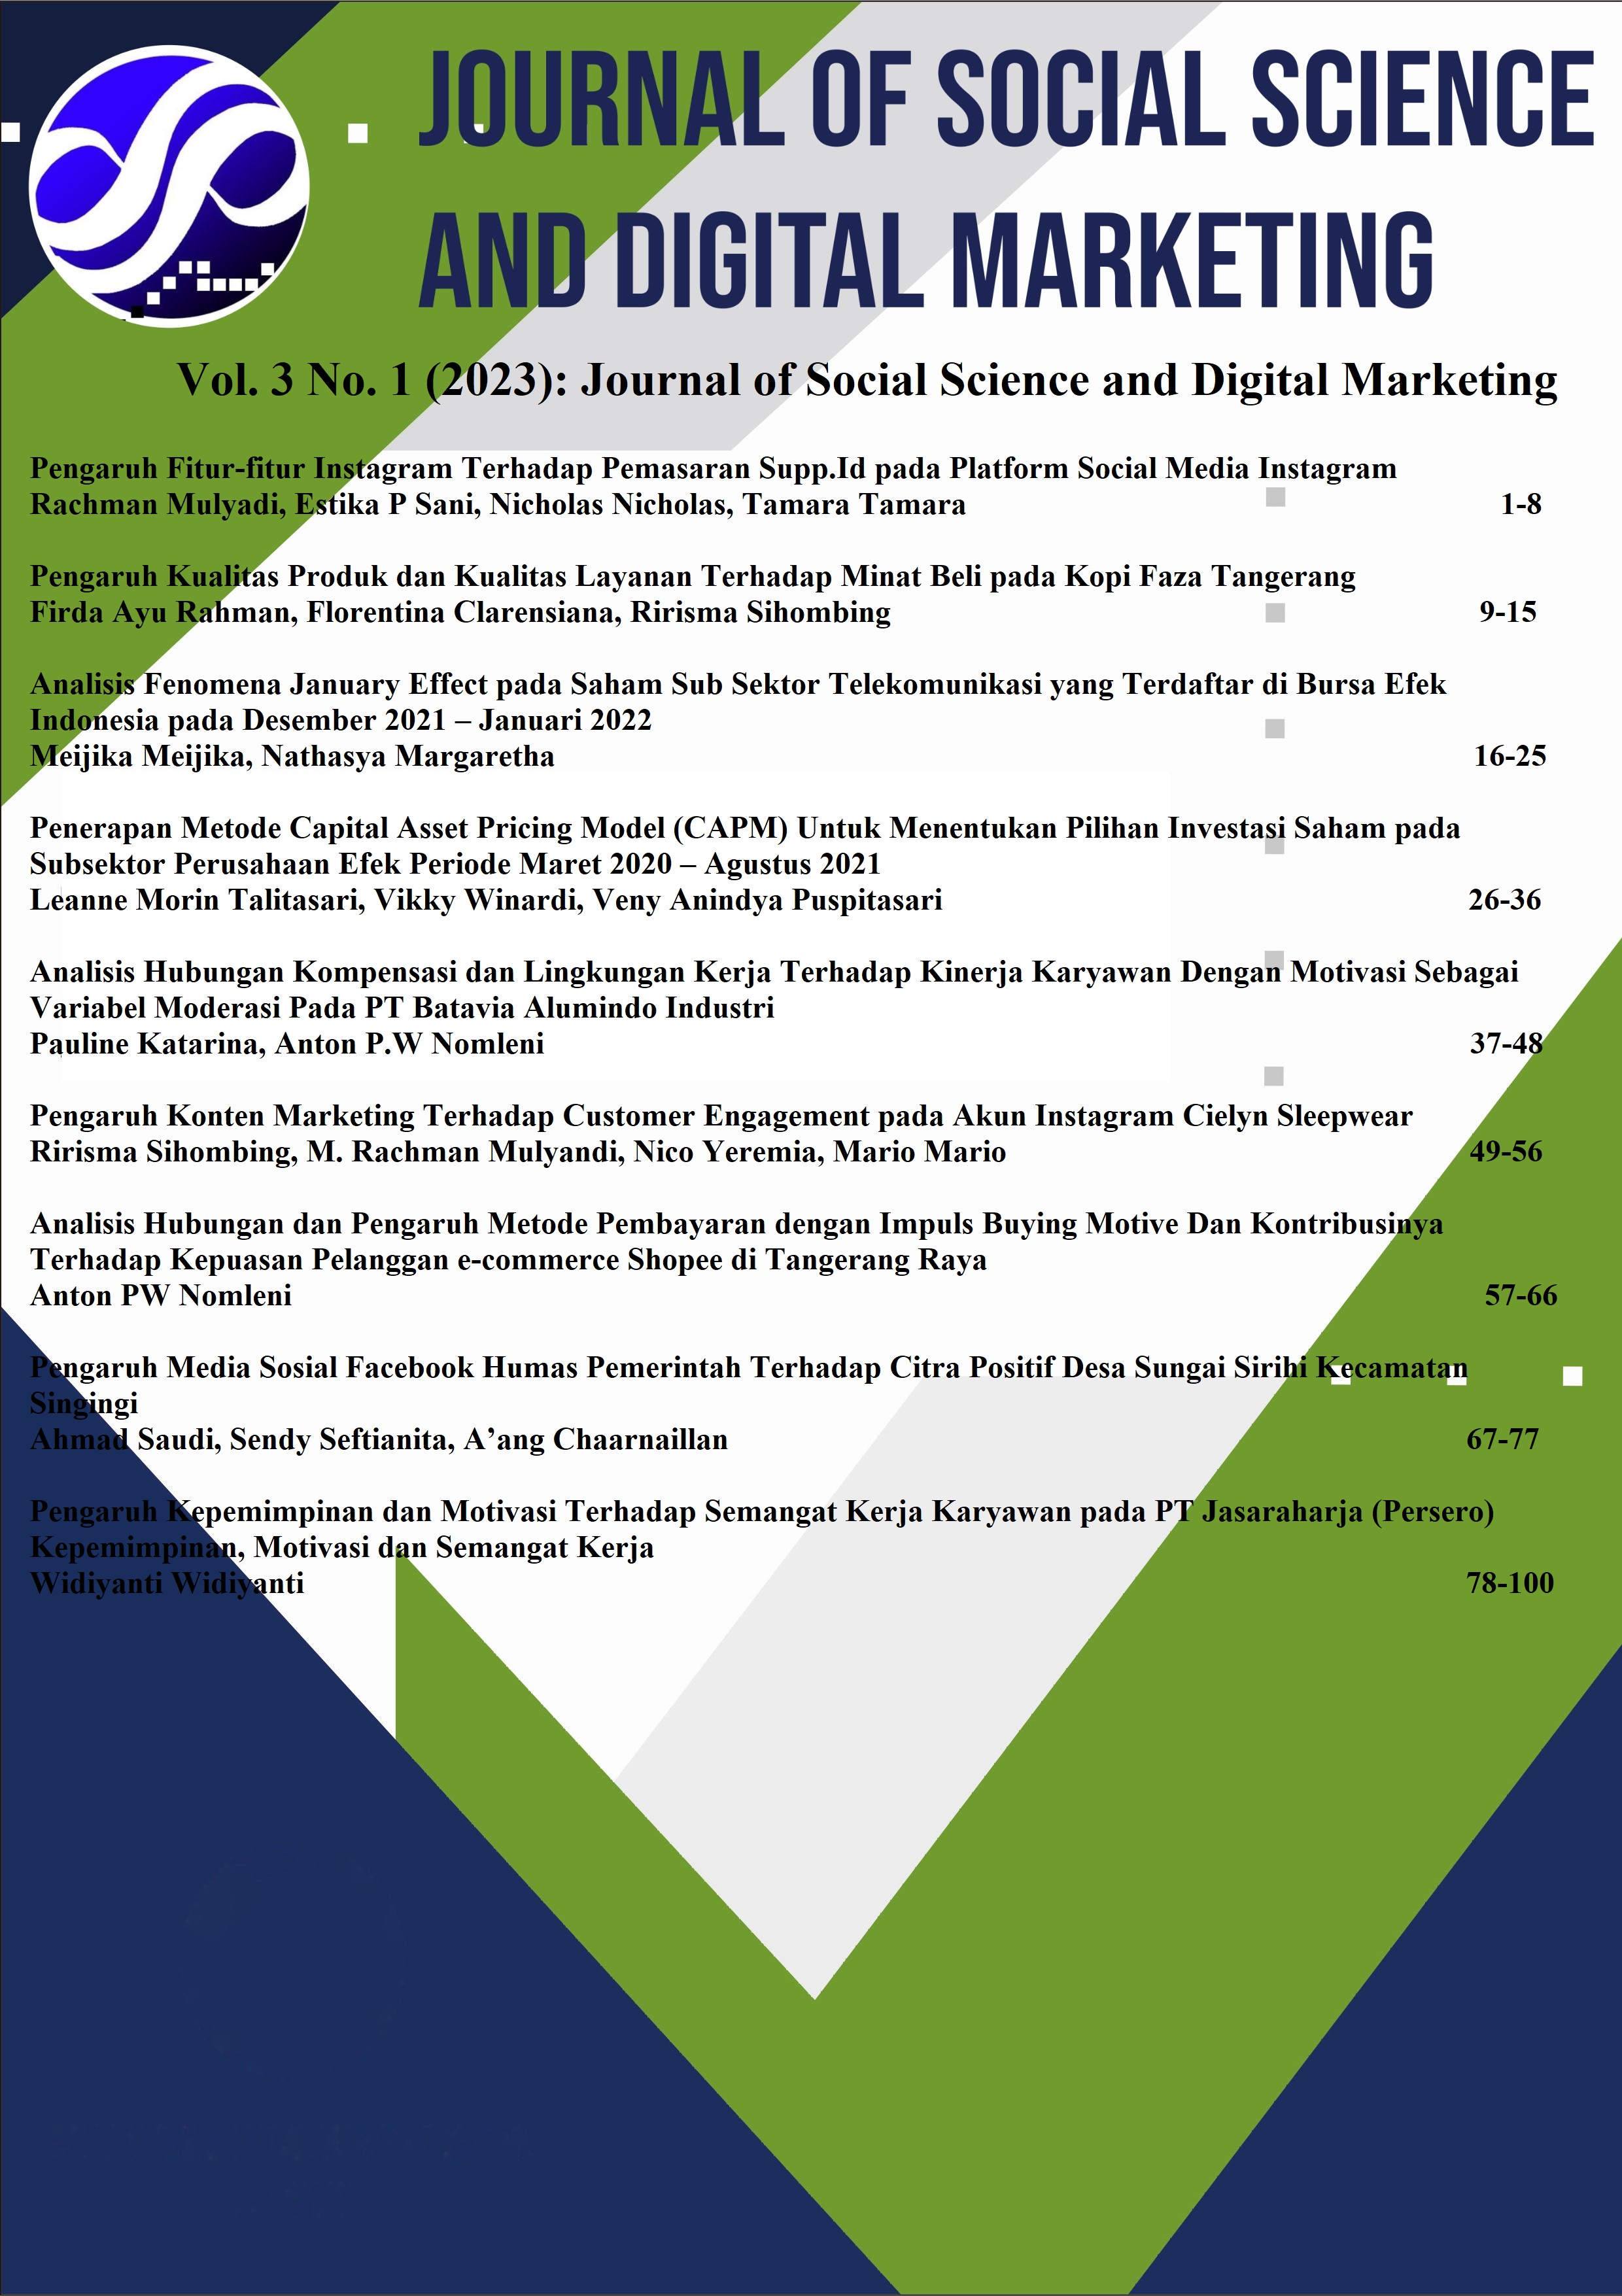 					View Vol. 3 No. 1 (2023): Journal of Social Science and Digital Marketing
				